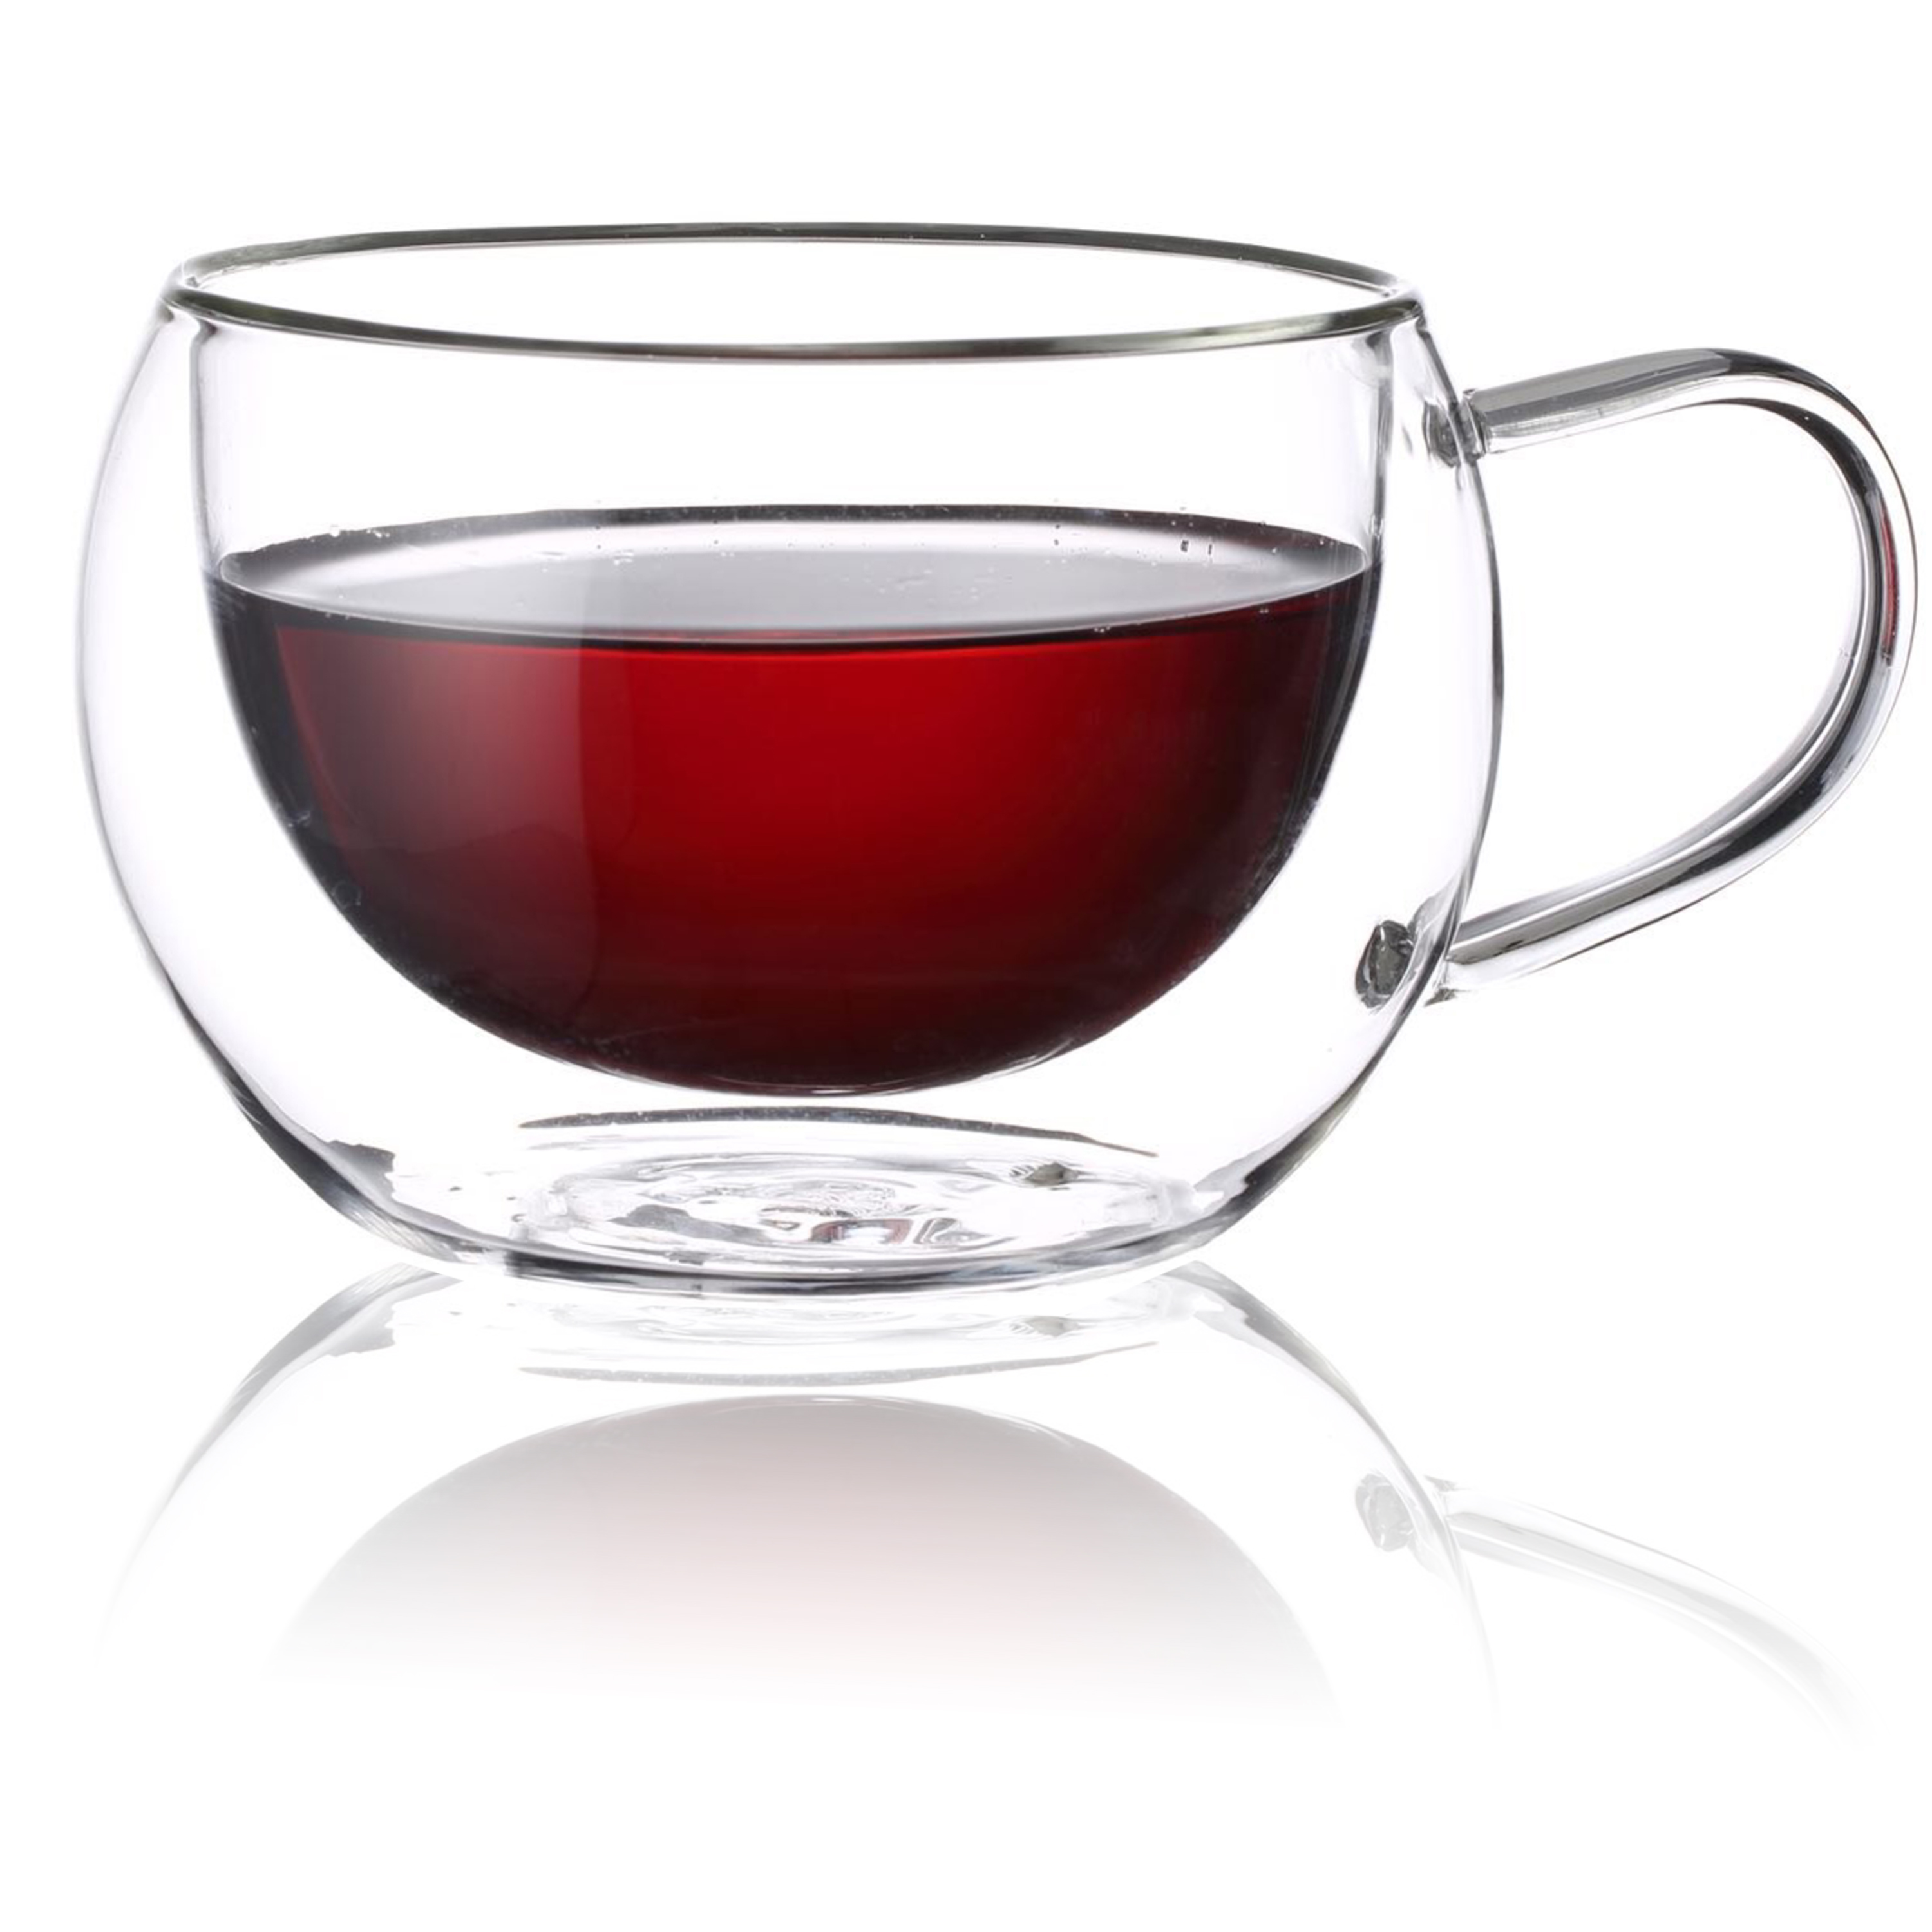 Teacup, Double-Walled Glass, 4 oz